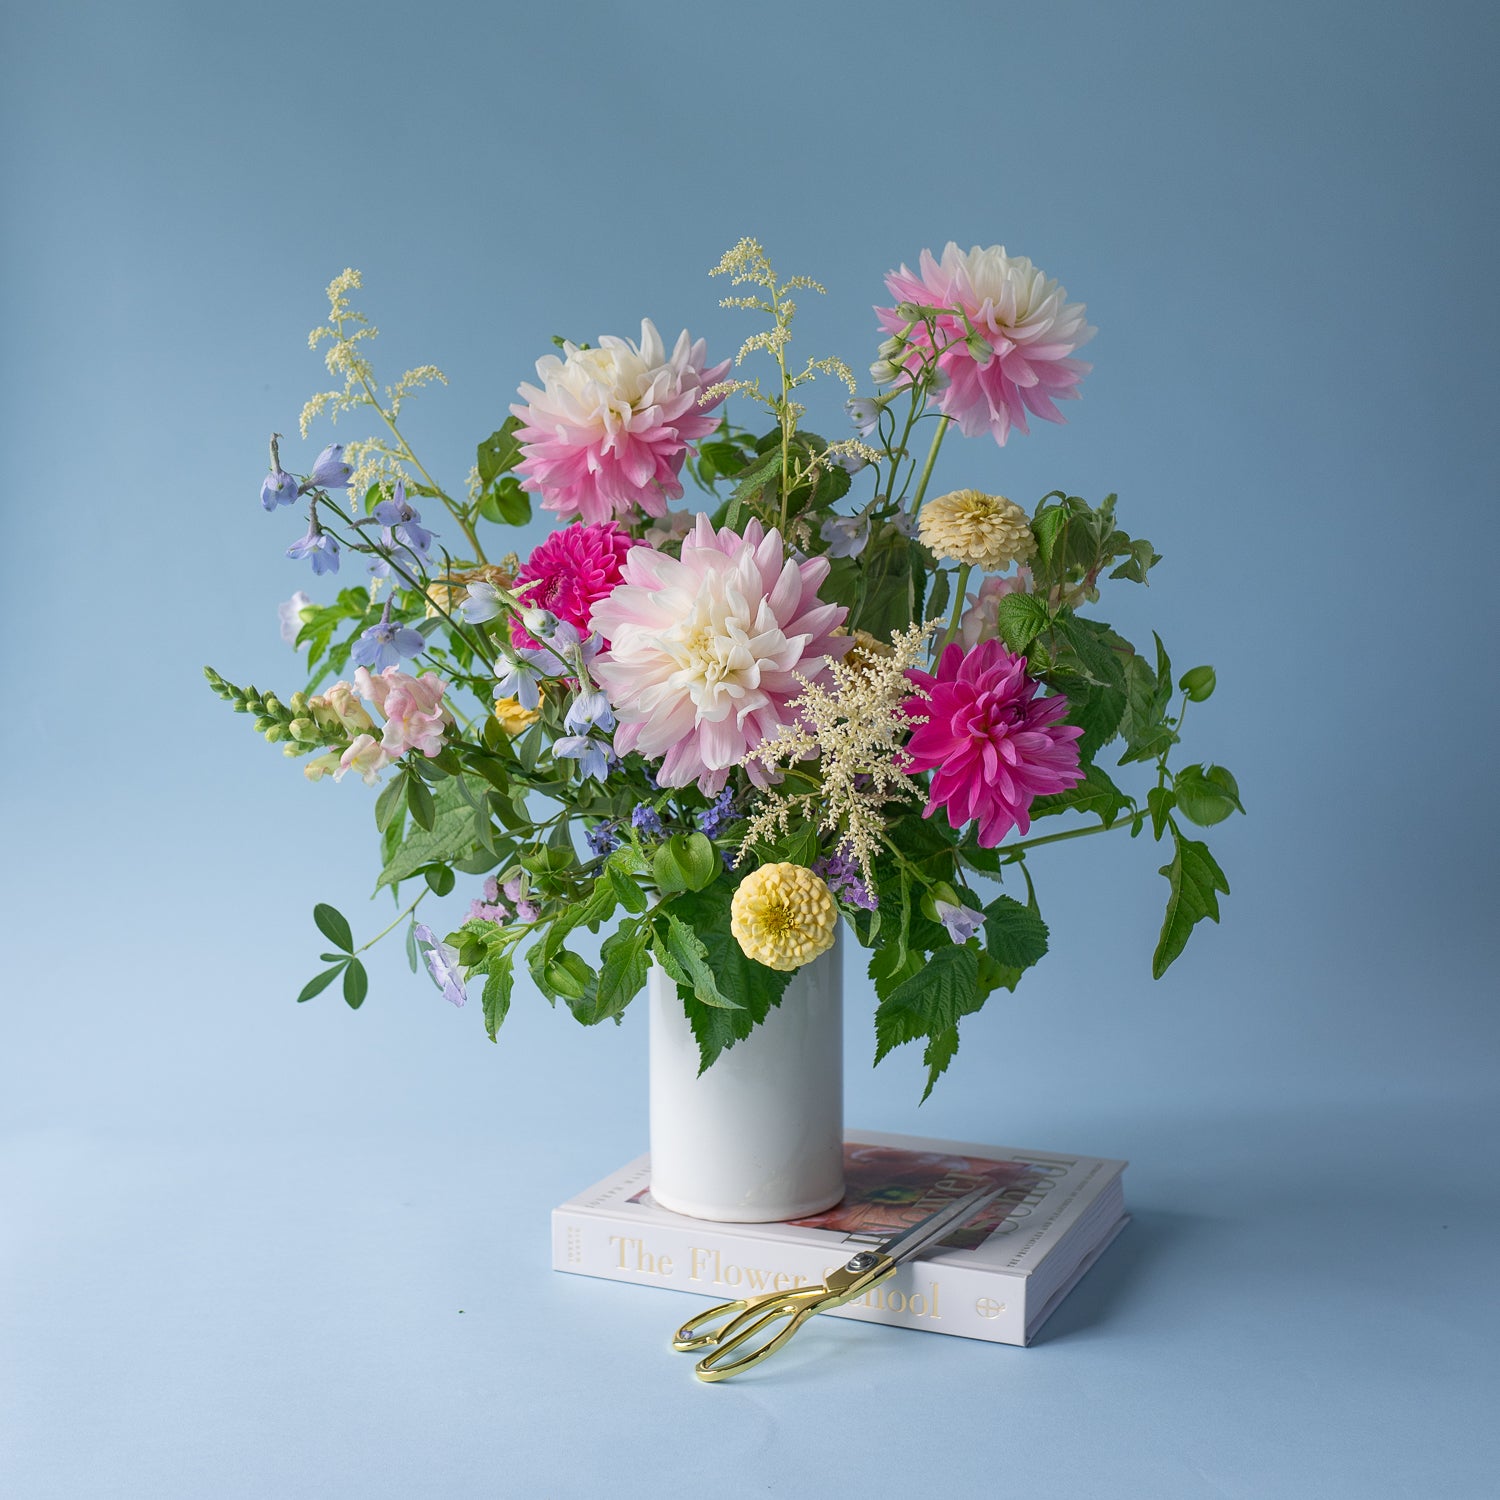 Love in a Mist deluxe flower arrangement designed in a stylish, white ceramic vase. Available for local delivery throughout Portland, Oregon